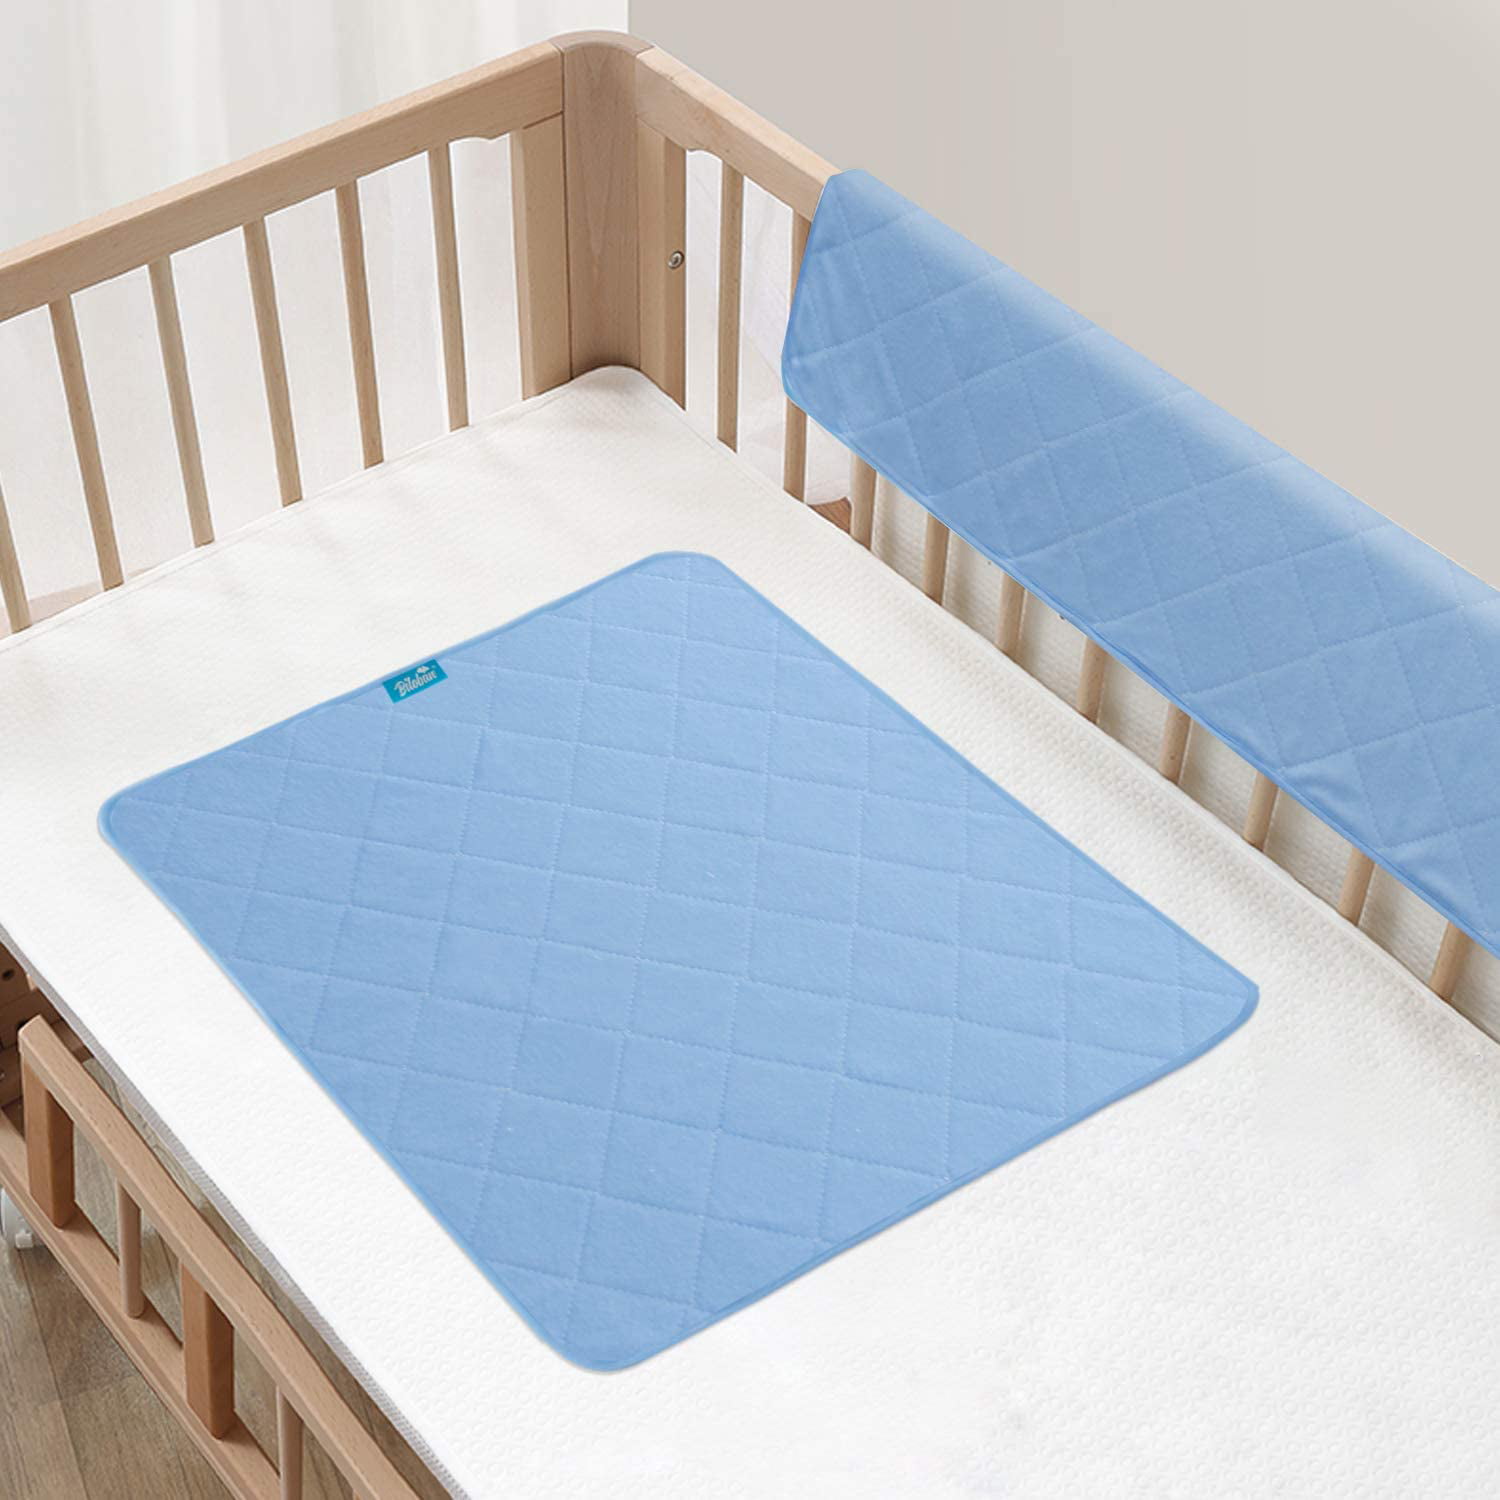 Waterproof Sheet and Mattress Protector 24 X 36,Non-Slip & Durable Wateproof Pad Mat for Baby Pack n Play/Crib/Mini Crib,Reusable Waterproof Bed Underpads for Baby，Adults Kids,Blue